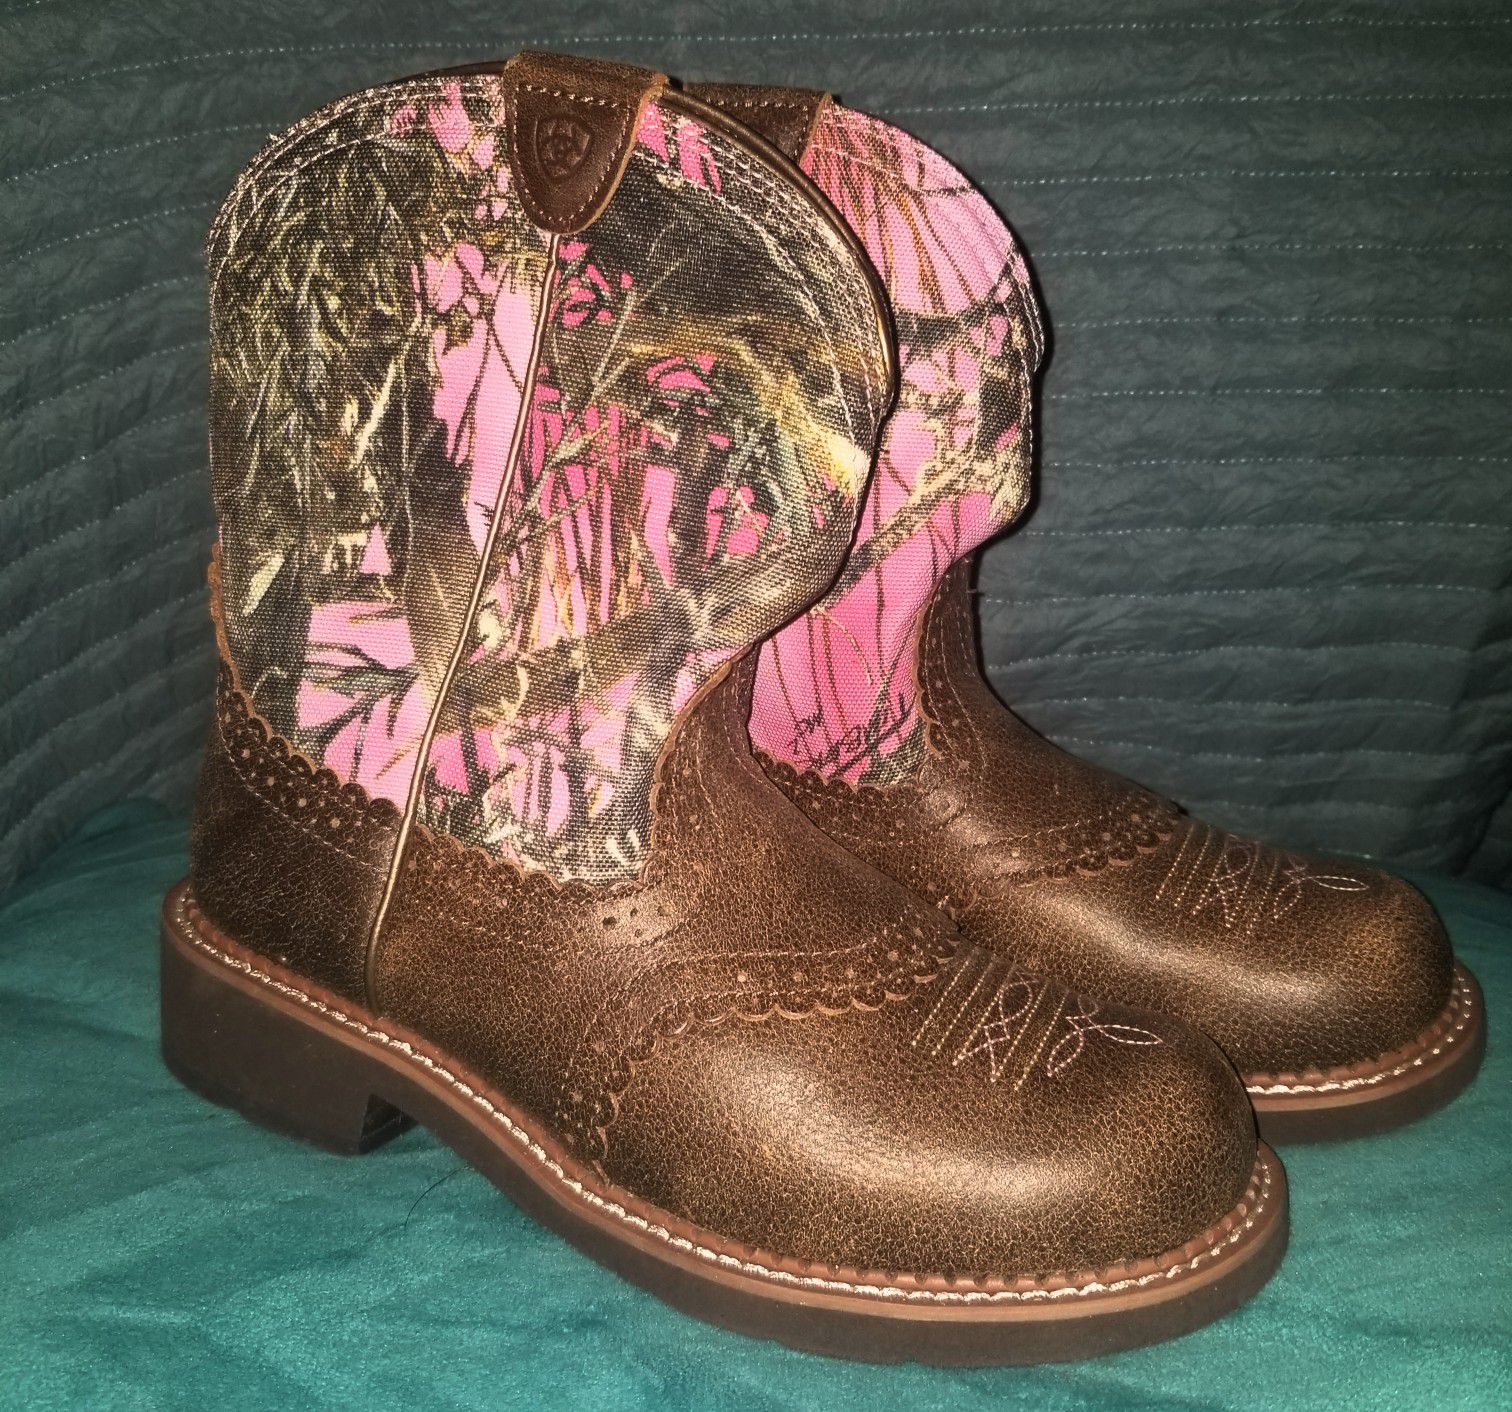 Ariat Women's Fatbaby Heritage Western Boots - Pink Camo size 9b